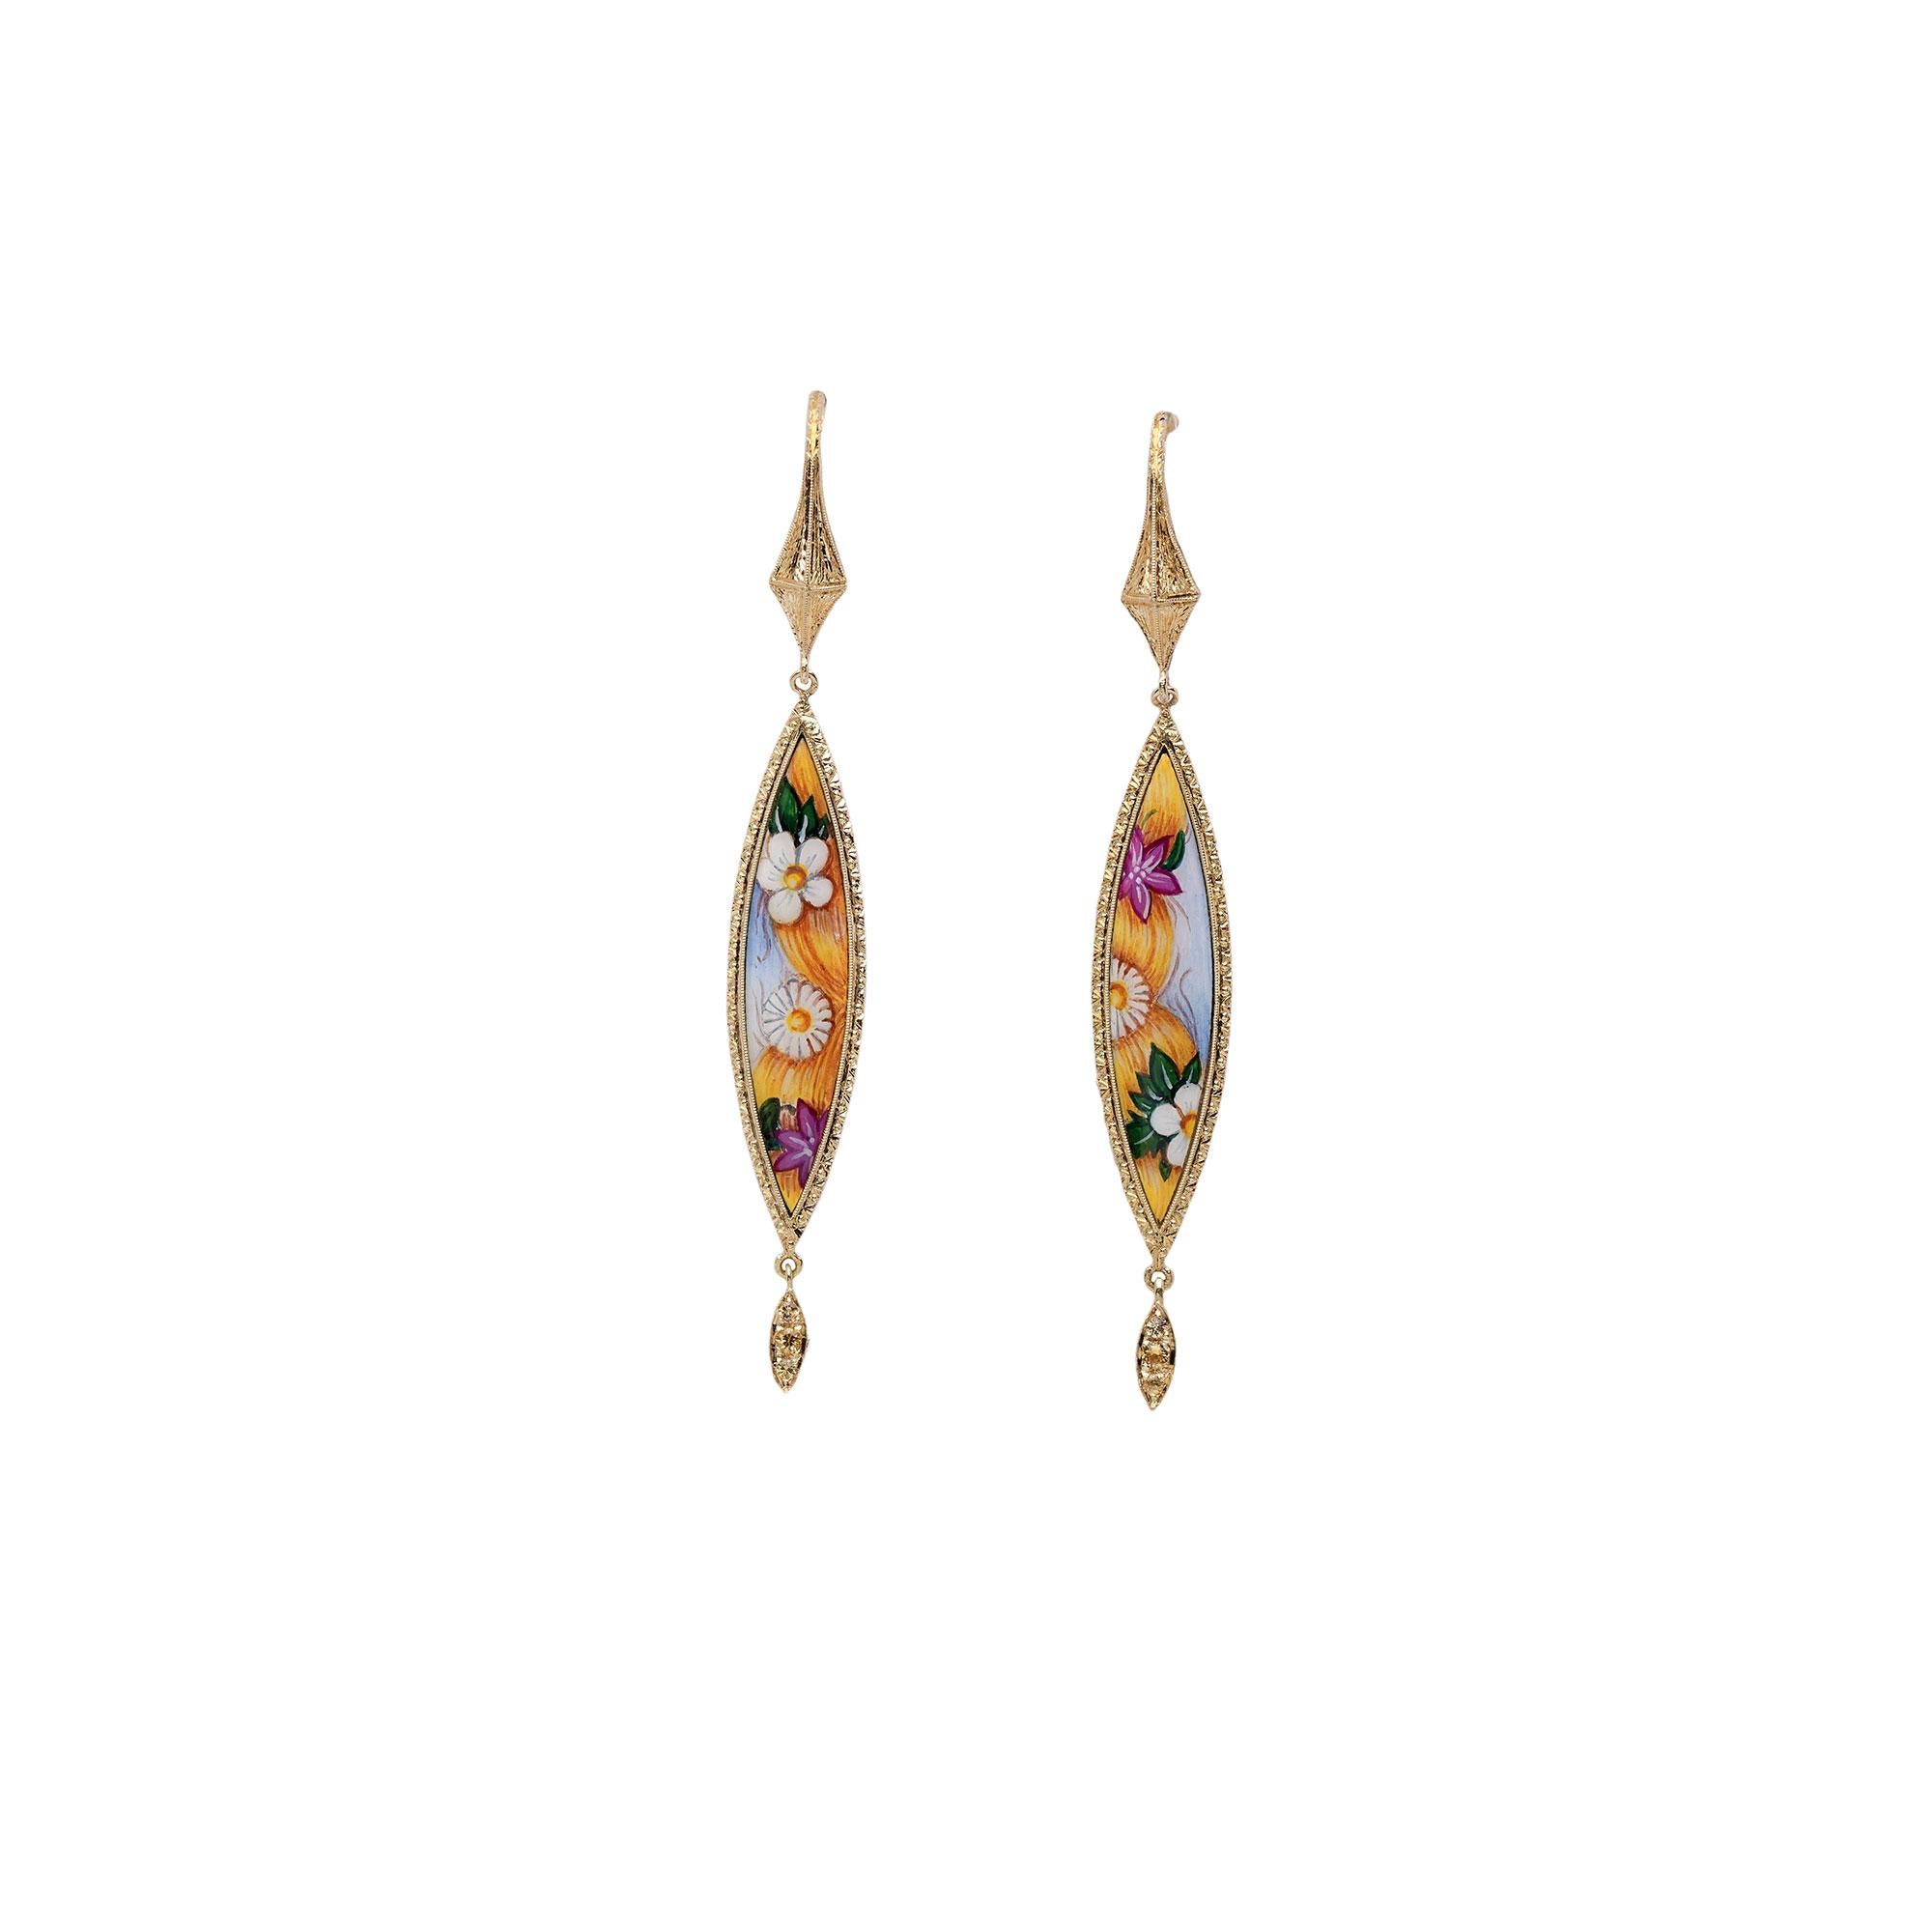 Round Cut 18kt gold earrings, Diamonds, engraved painted in miniature & enamelled by hands For Sale